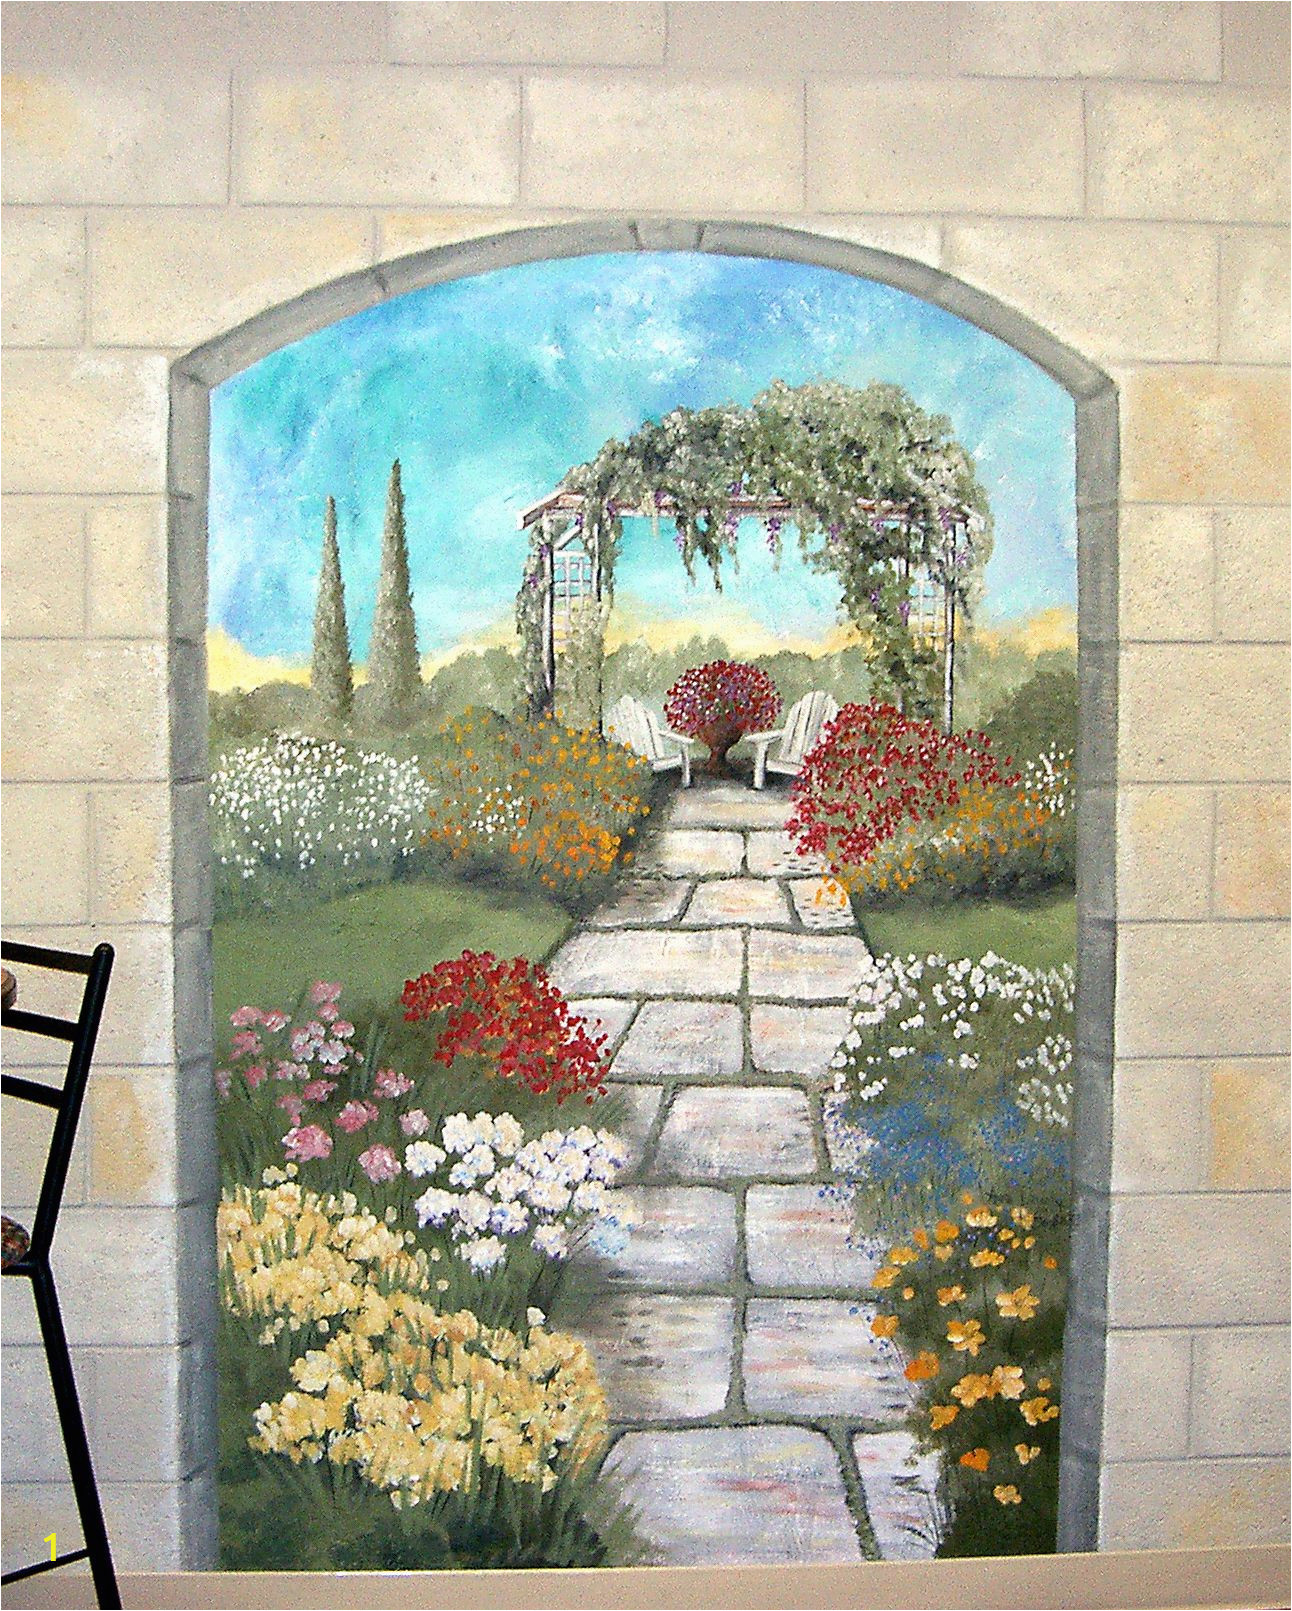 Mural Painting On Concrete Wall Garden Mural On A Cement Block Wall Colorful Flower Garden